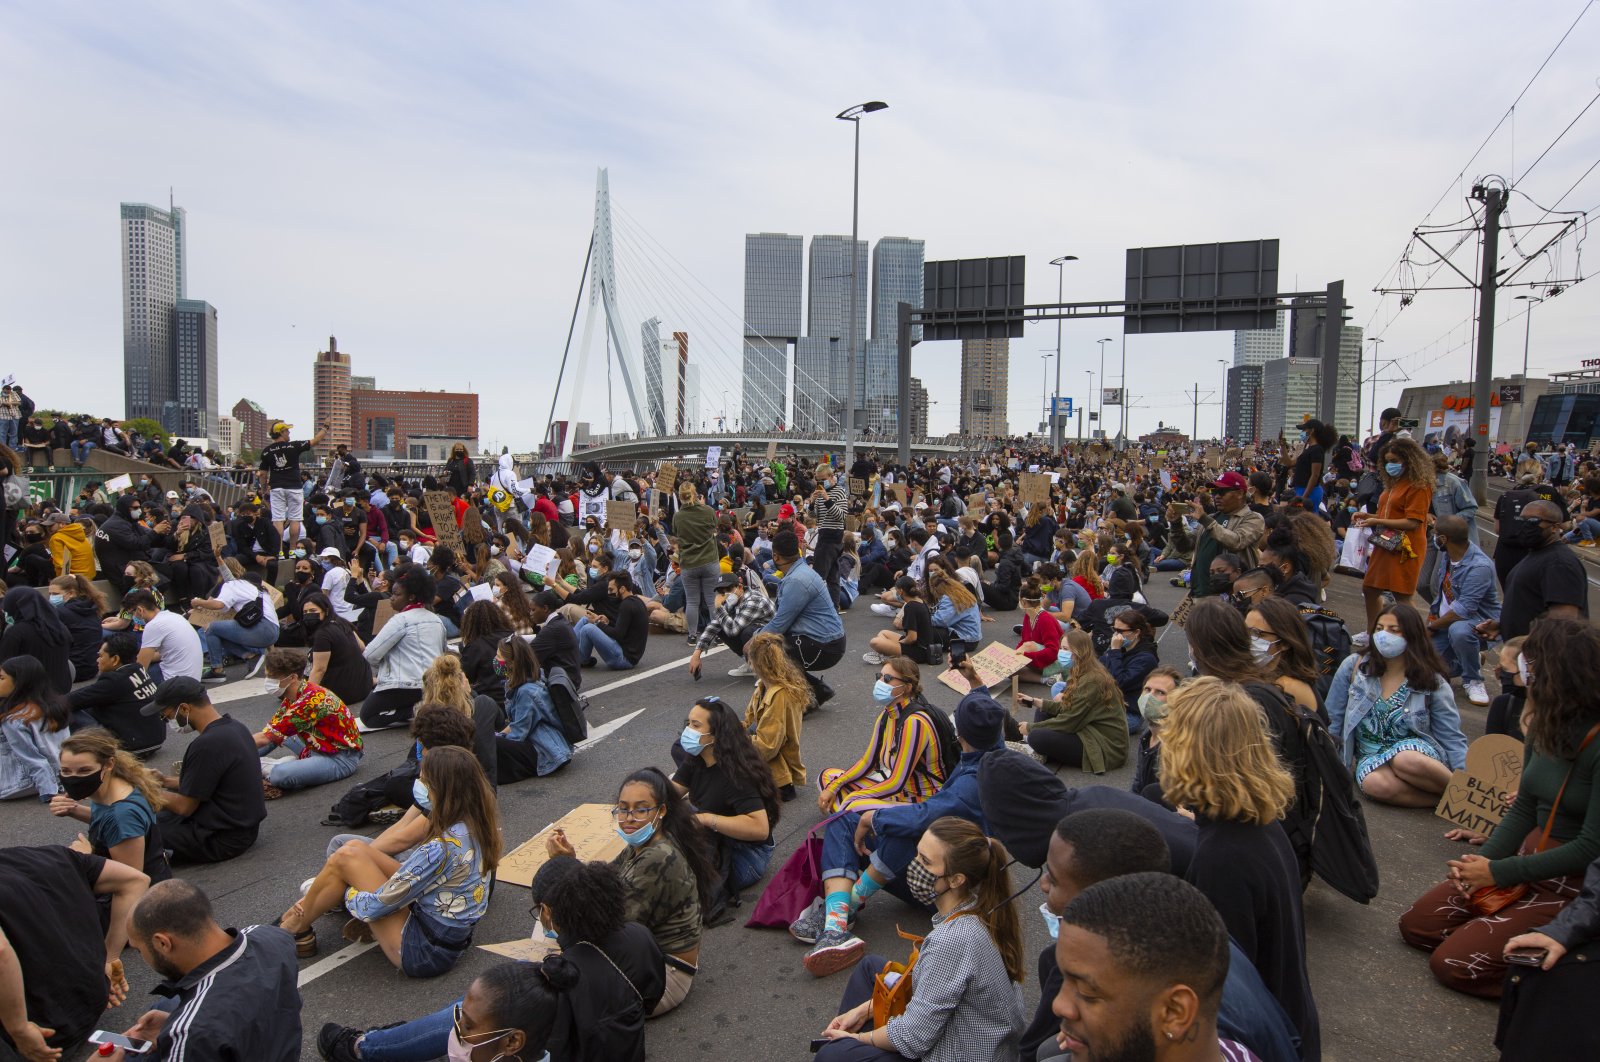 Thousands of people take part in a demonstration, Rotterdam, June 3, 2020. (AP Photo)